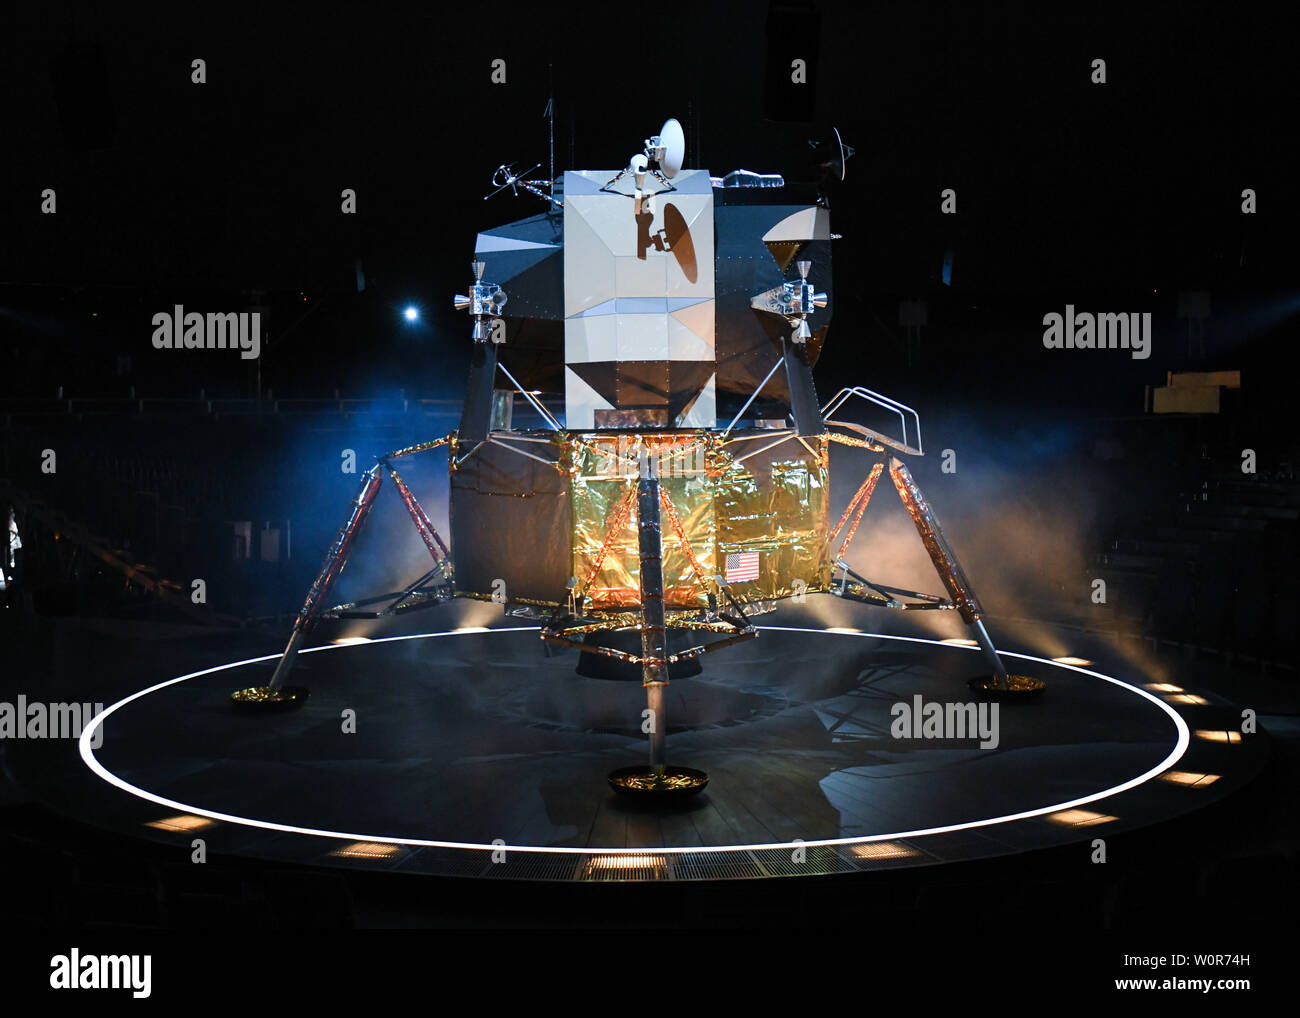 June 27, 2019 - Pasadena, California, USA - A general view of the Apollo 11 Lunar Module in the theater of the Lunar Dome for the Apollo 11 media preview event at Rose Bowl in Pasadena, California. (Credit Image: © Billy Bennight/ZUMA Wire) Stock Photo